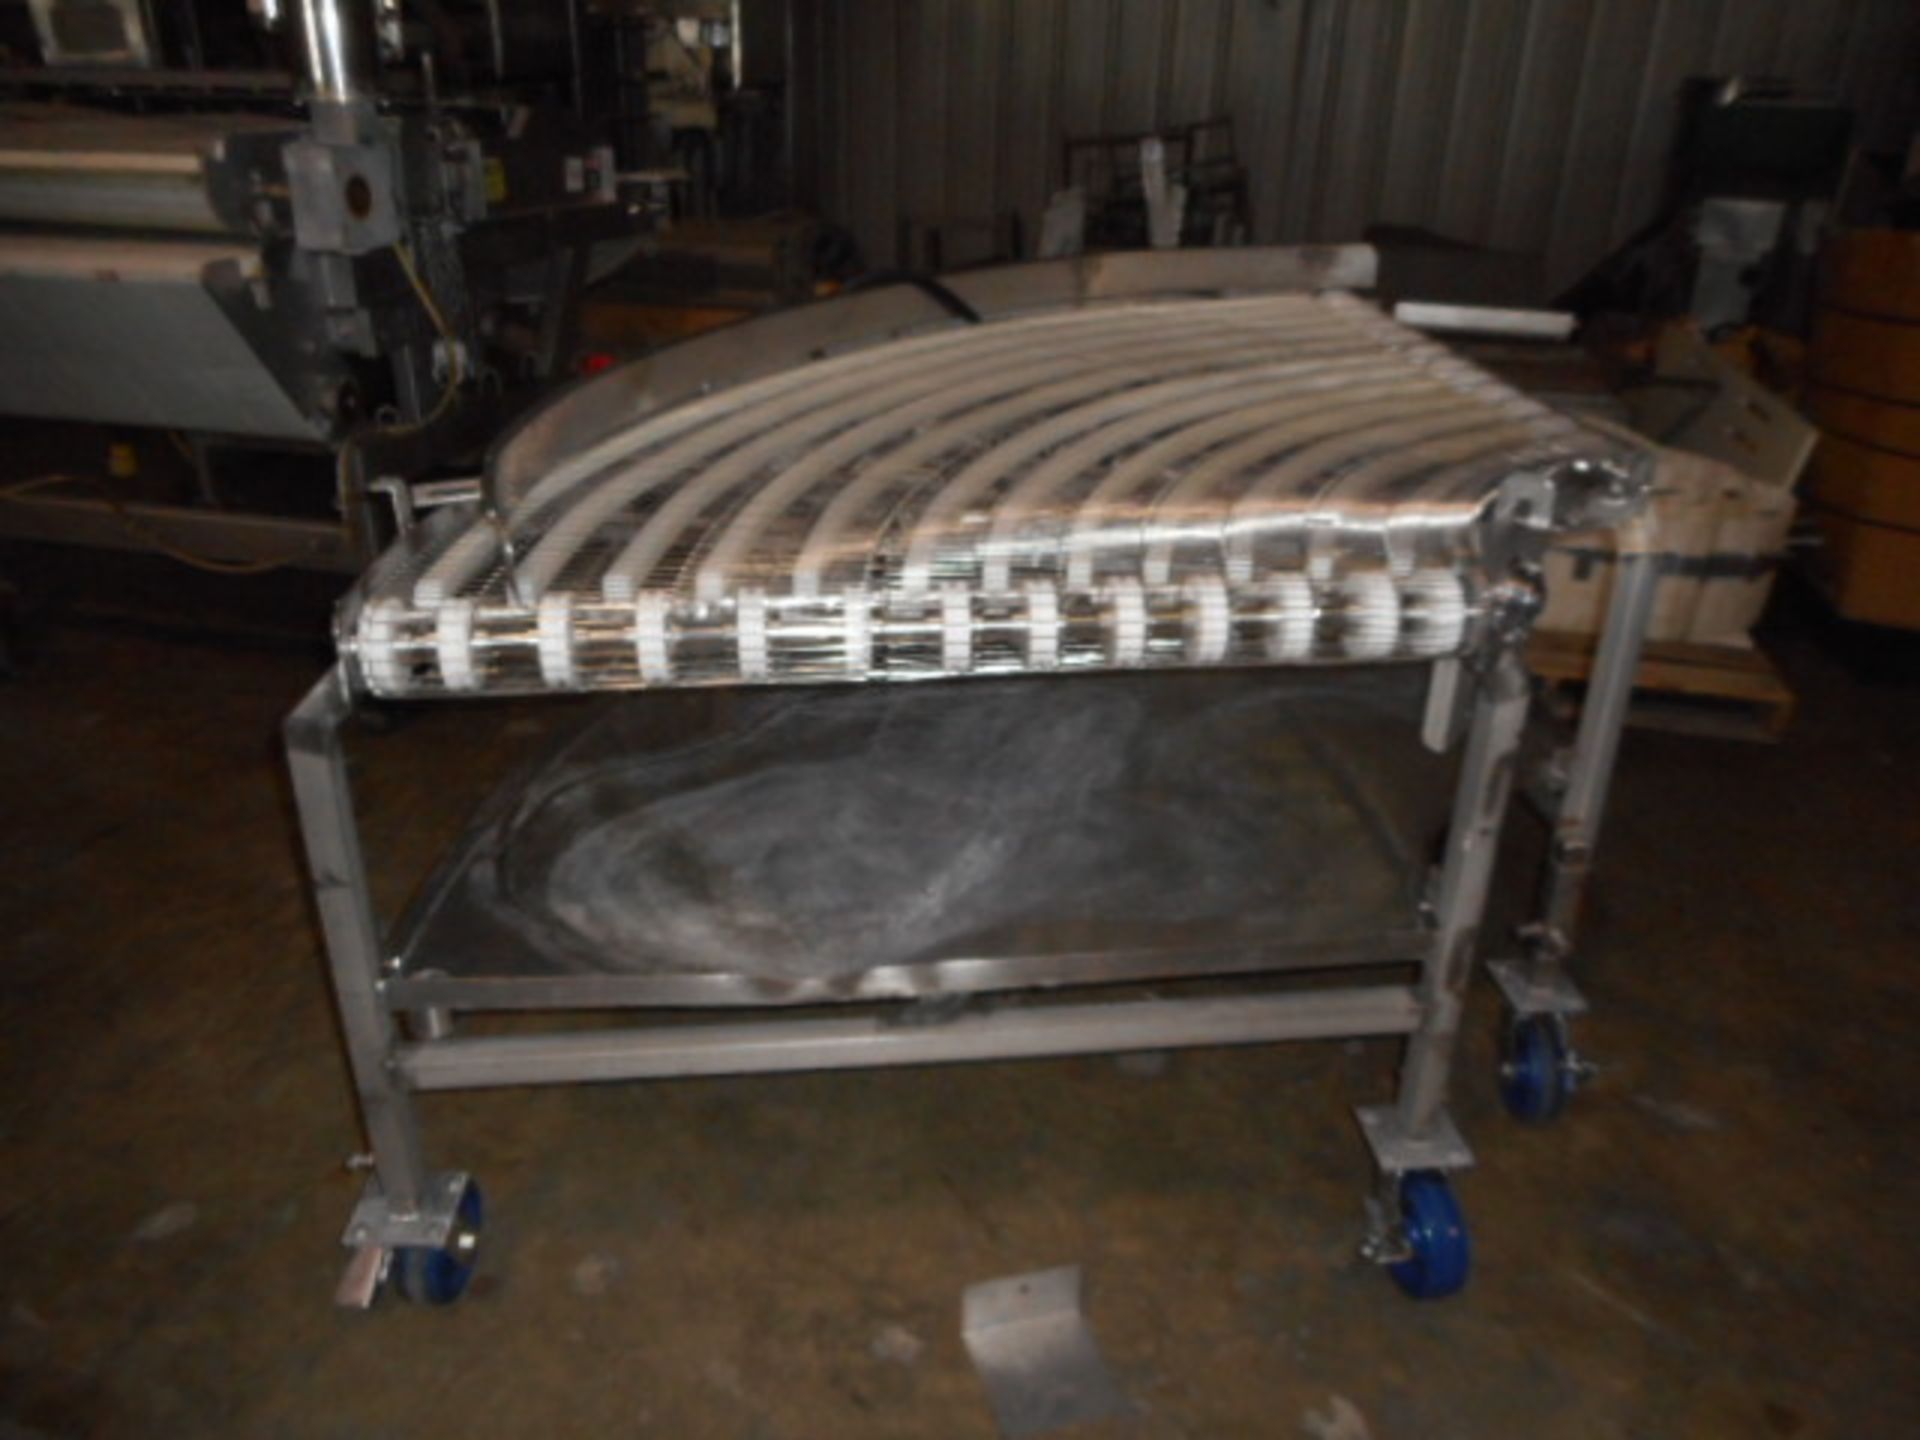 (Located in Cartersville, GA) 40” wide 90 degree conveyor Manufacturer unknown Like new condition - Image 2 of 3